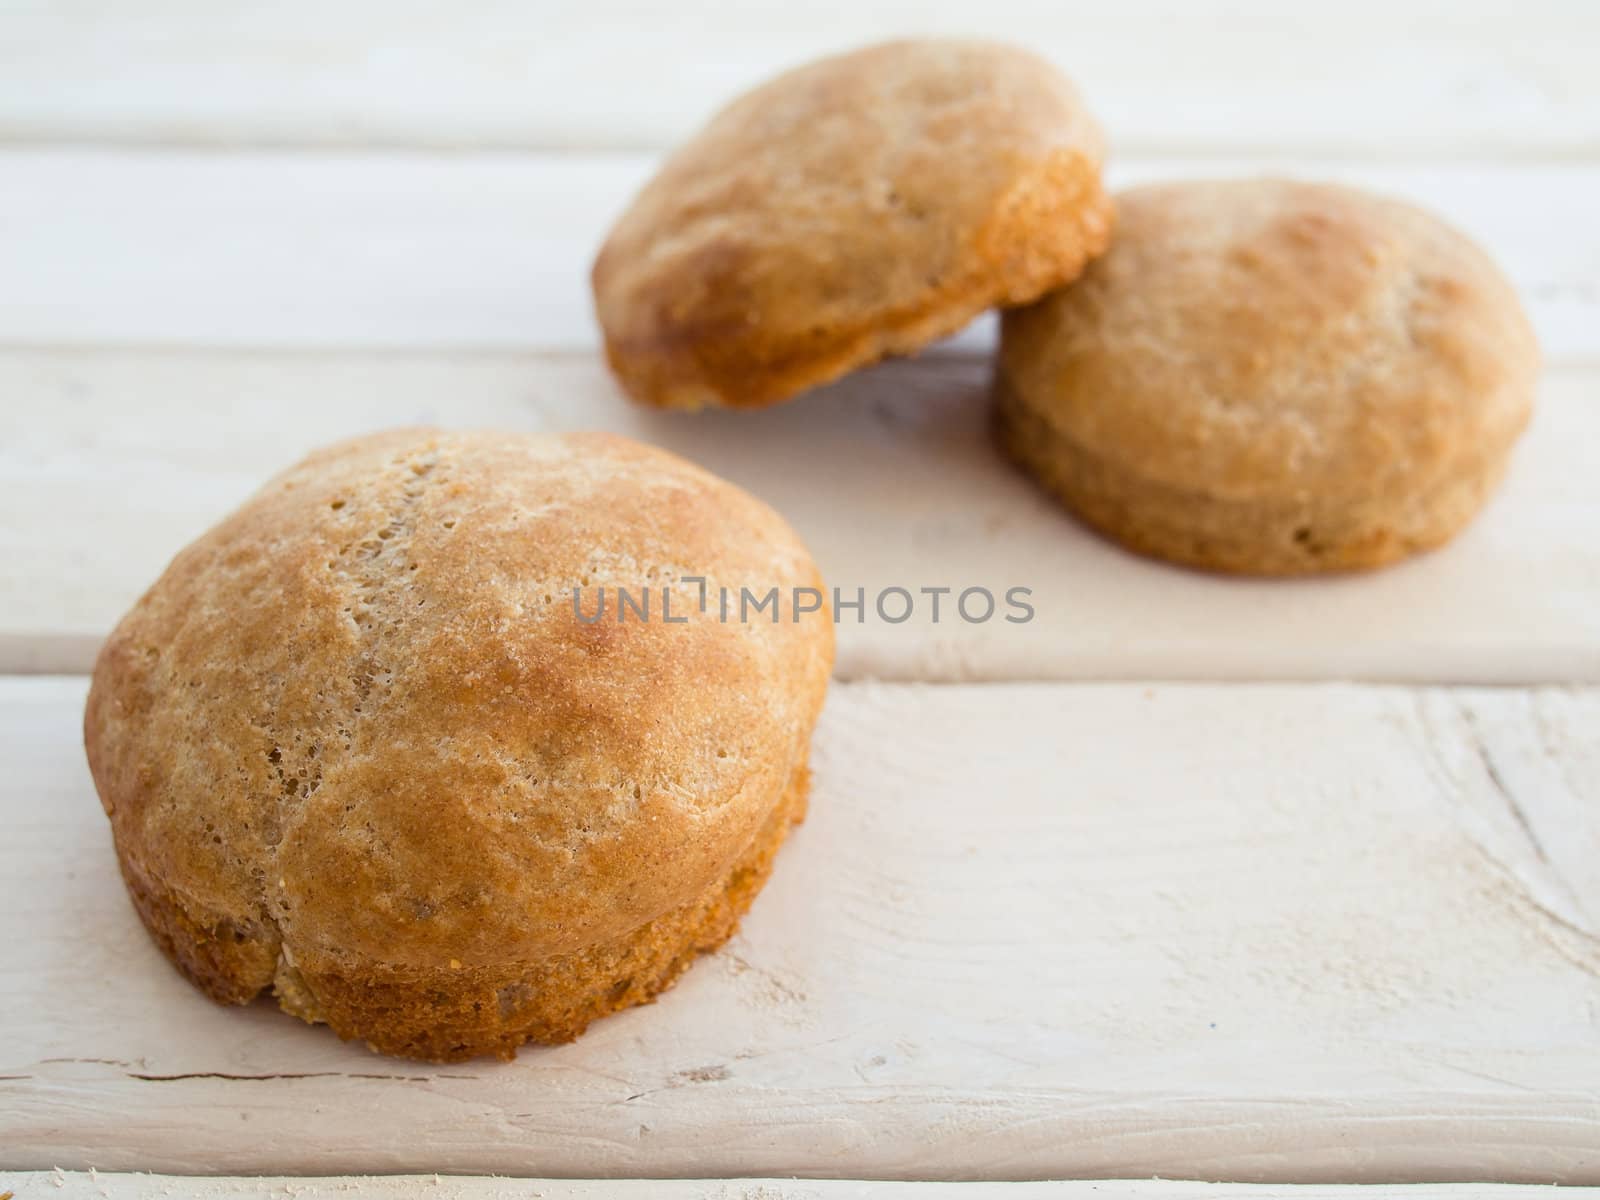 English muffins by Talanis